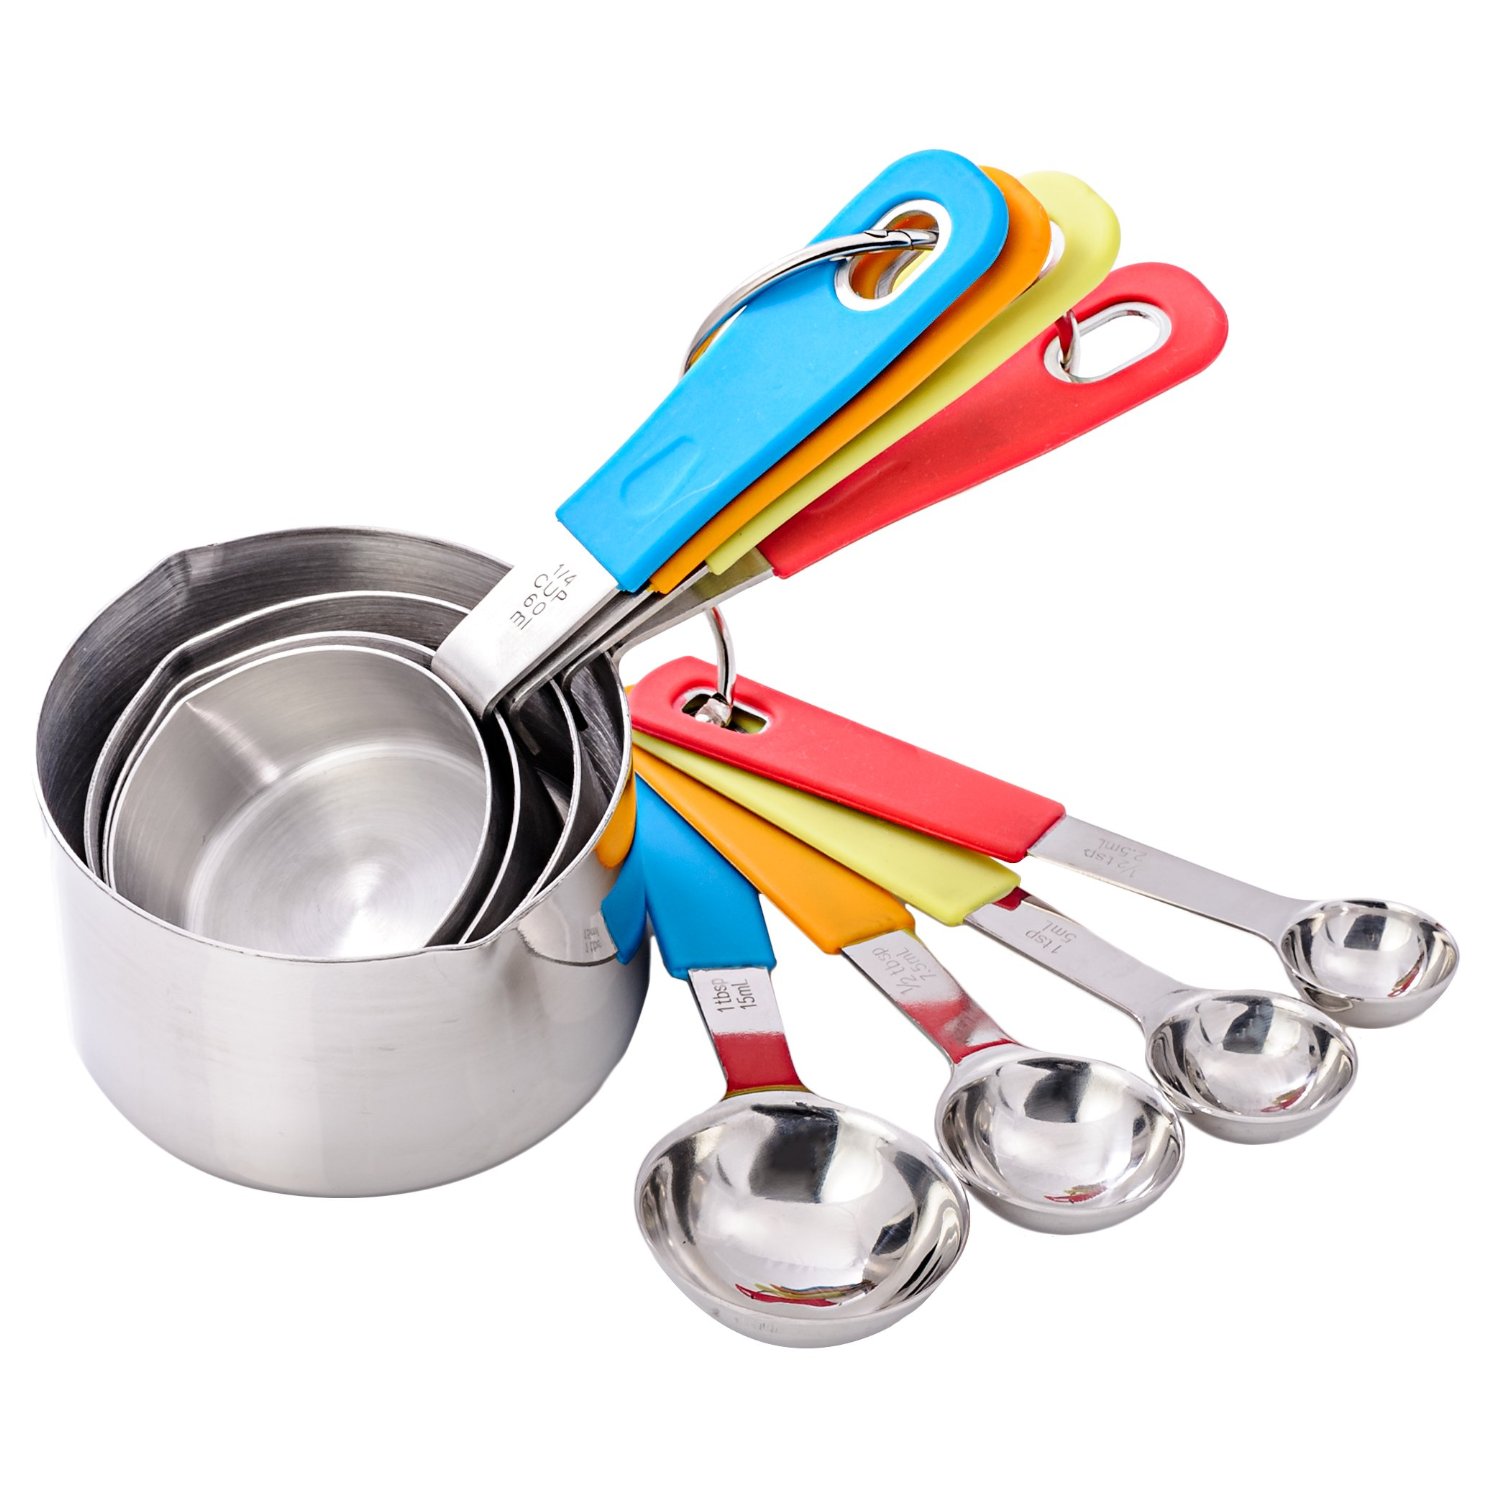 popular-product-reviews-by-amy-kukpo-8-peice-measuring-cups-and-spoons-set-review